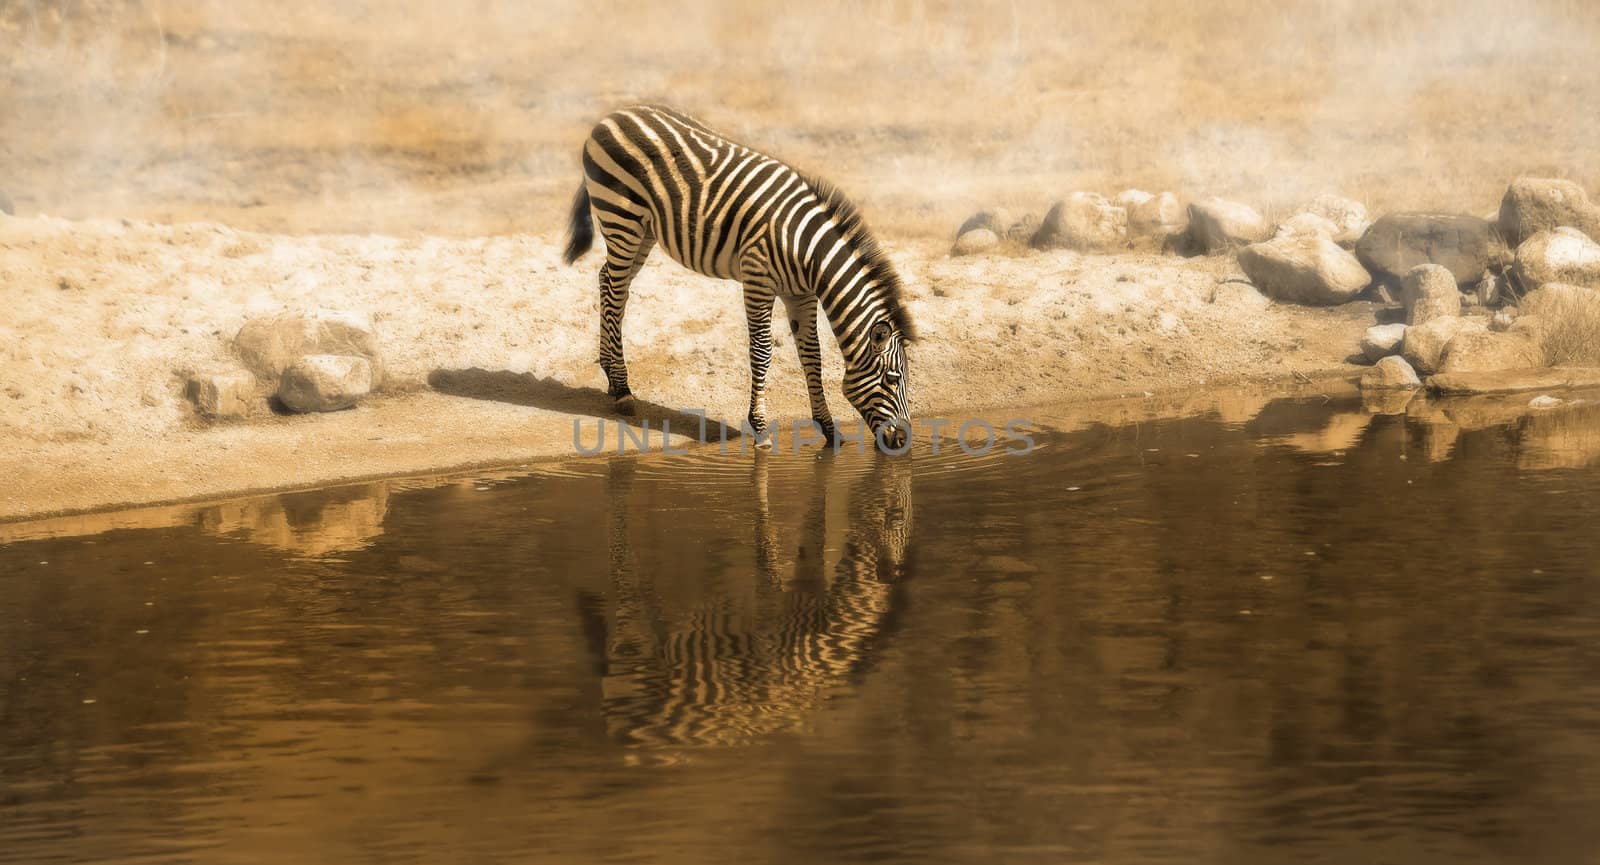 A panorama picture of a Zebra drinking water from a waterhole